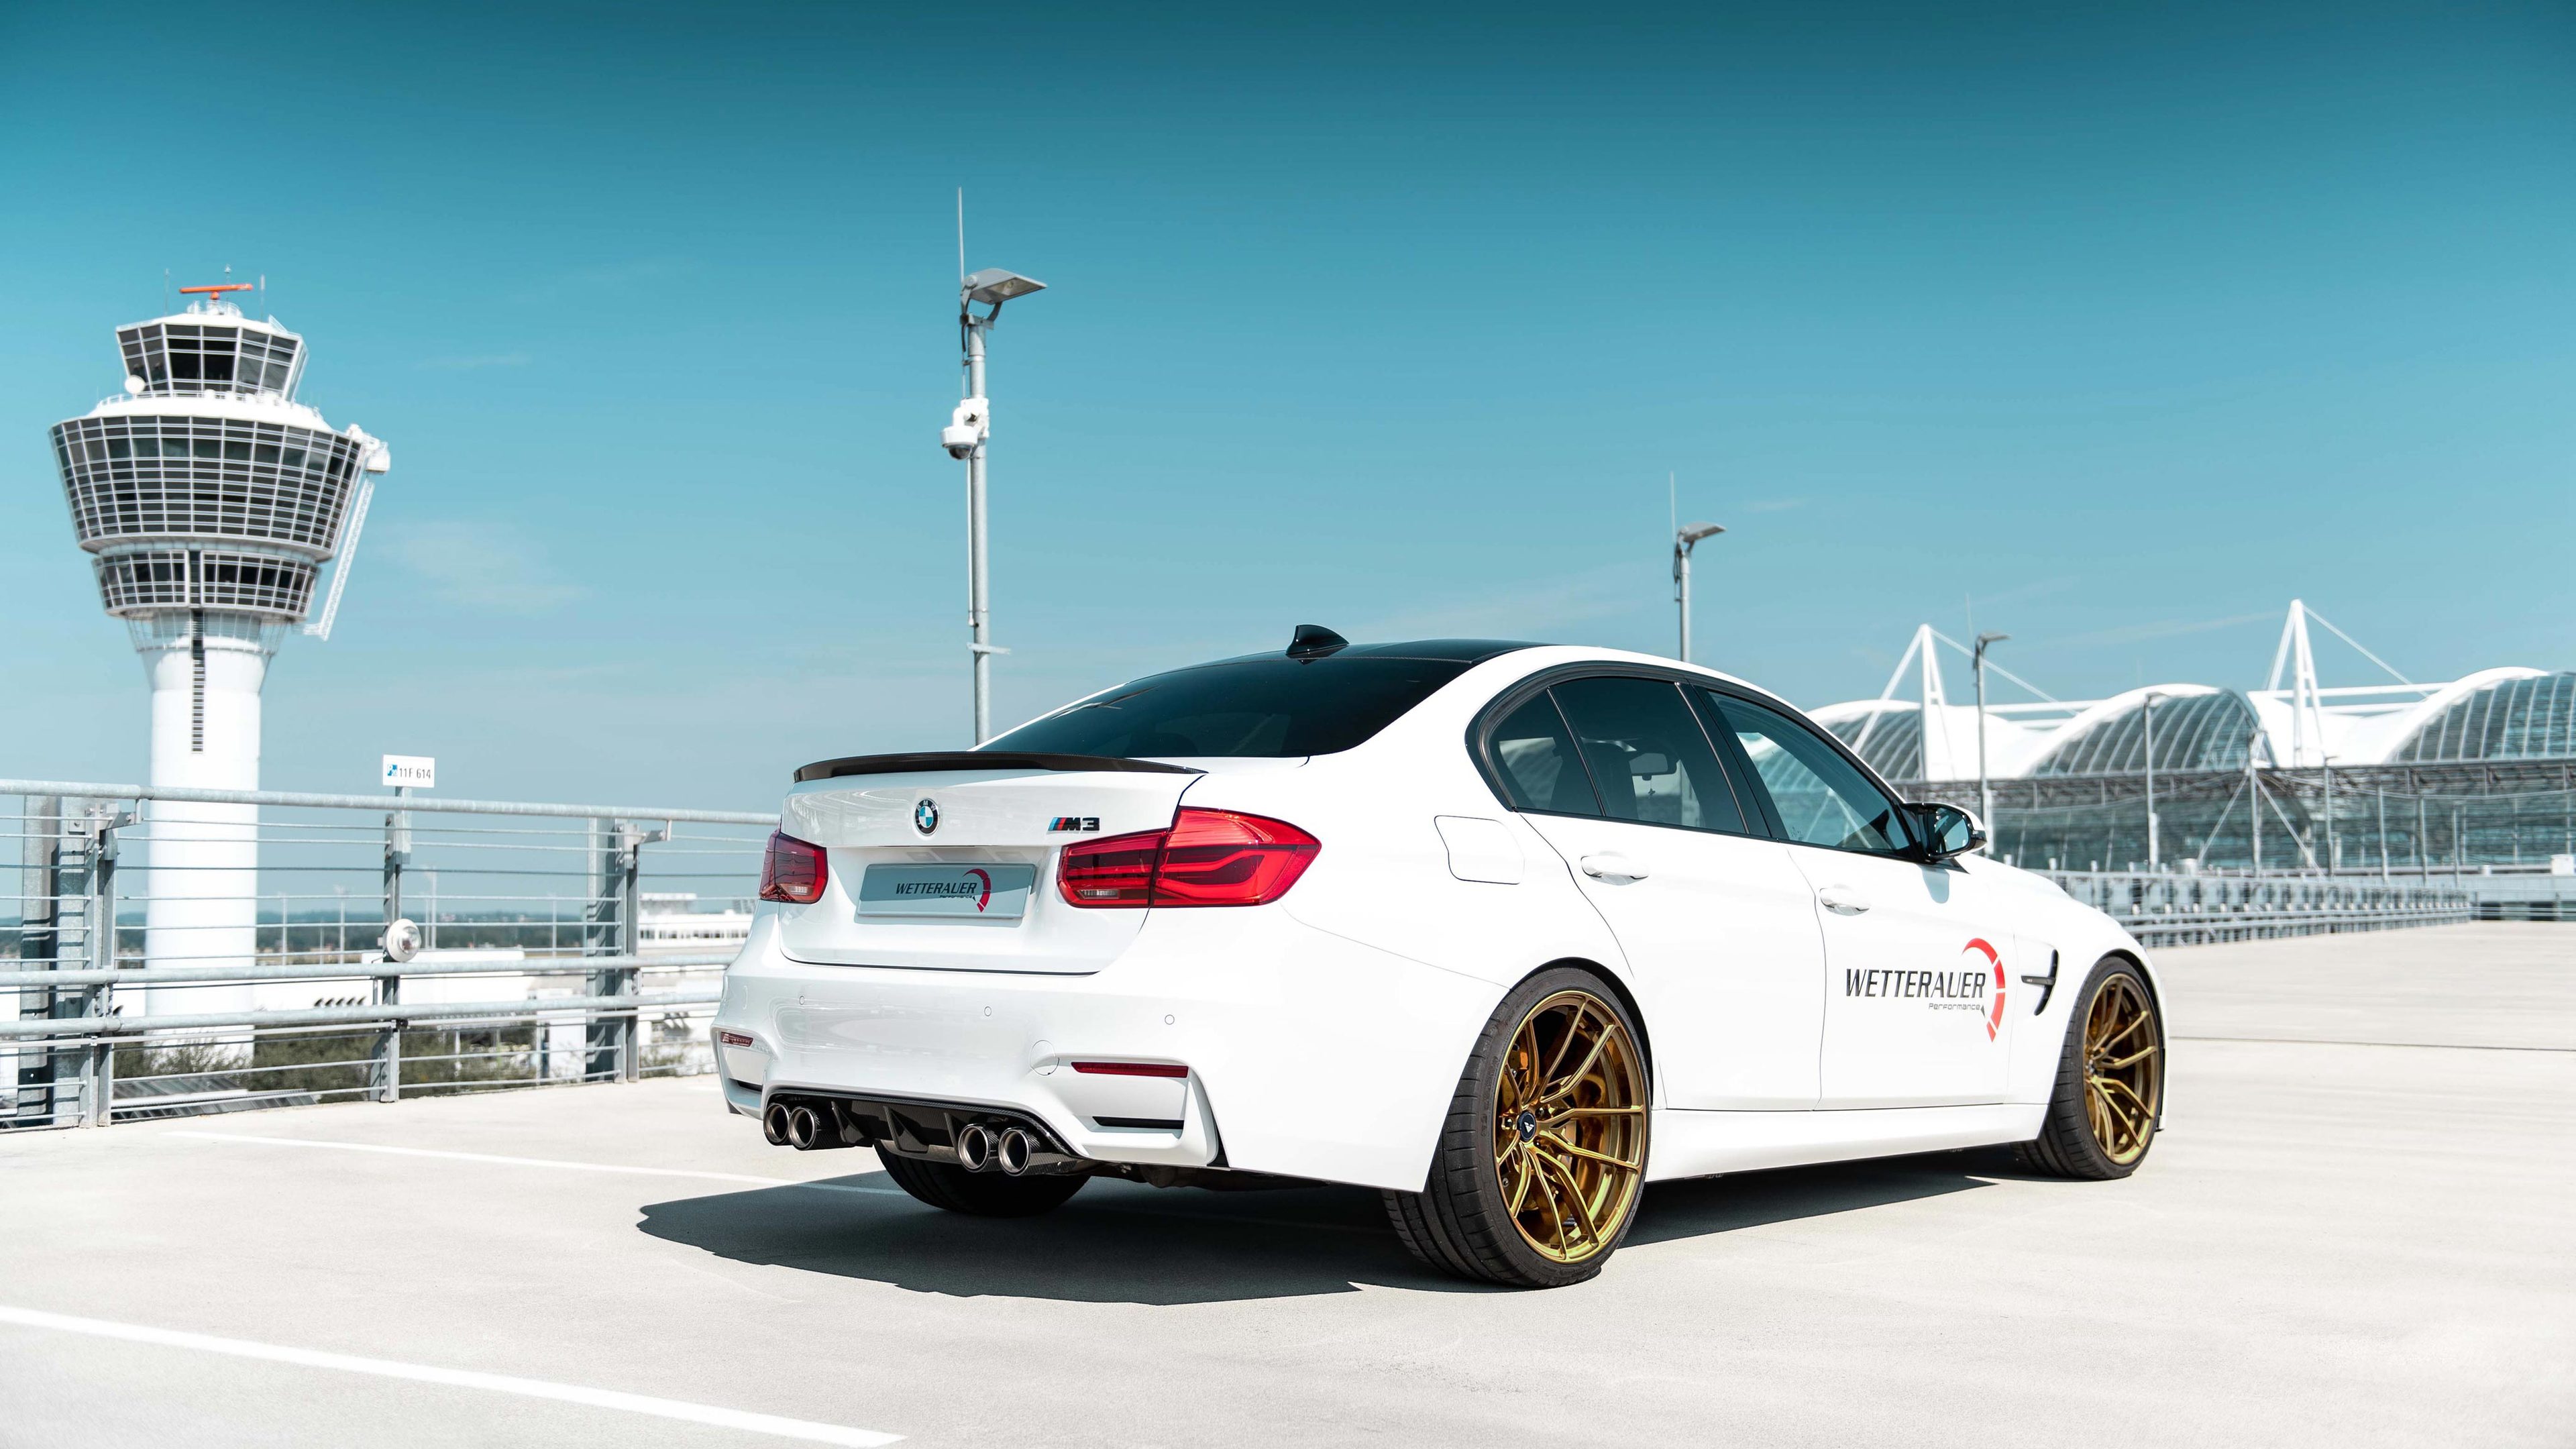 Bmw M3 Gts Wallpapers